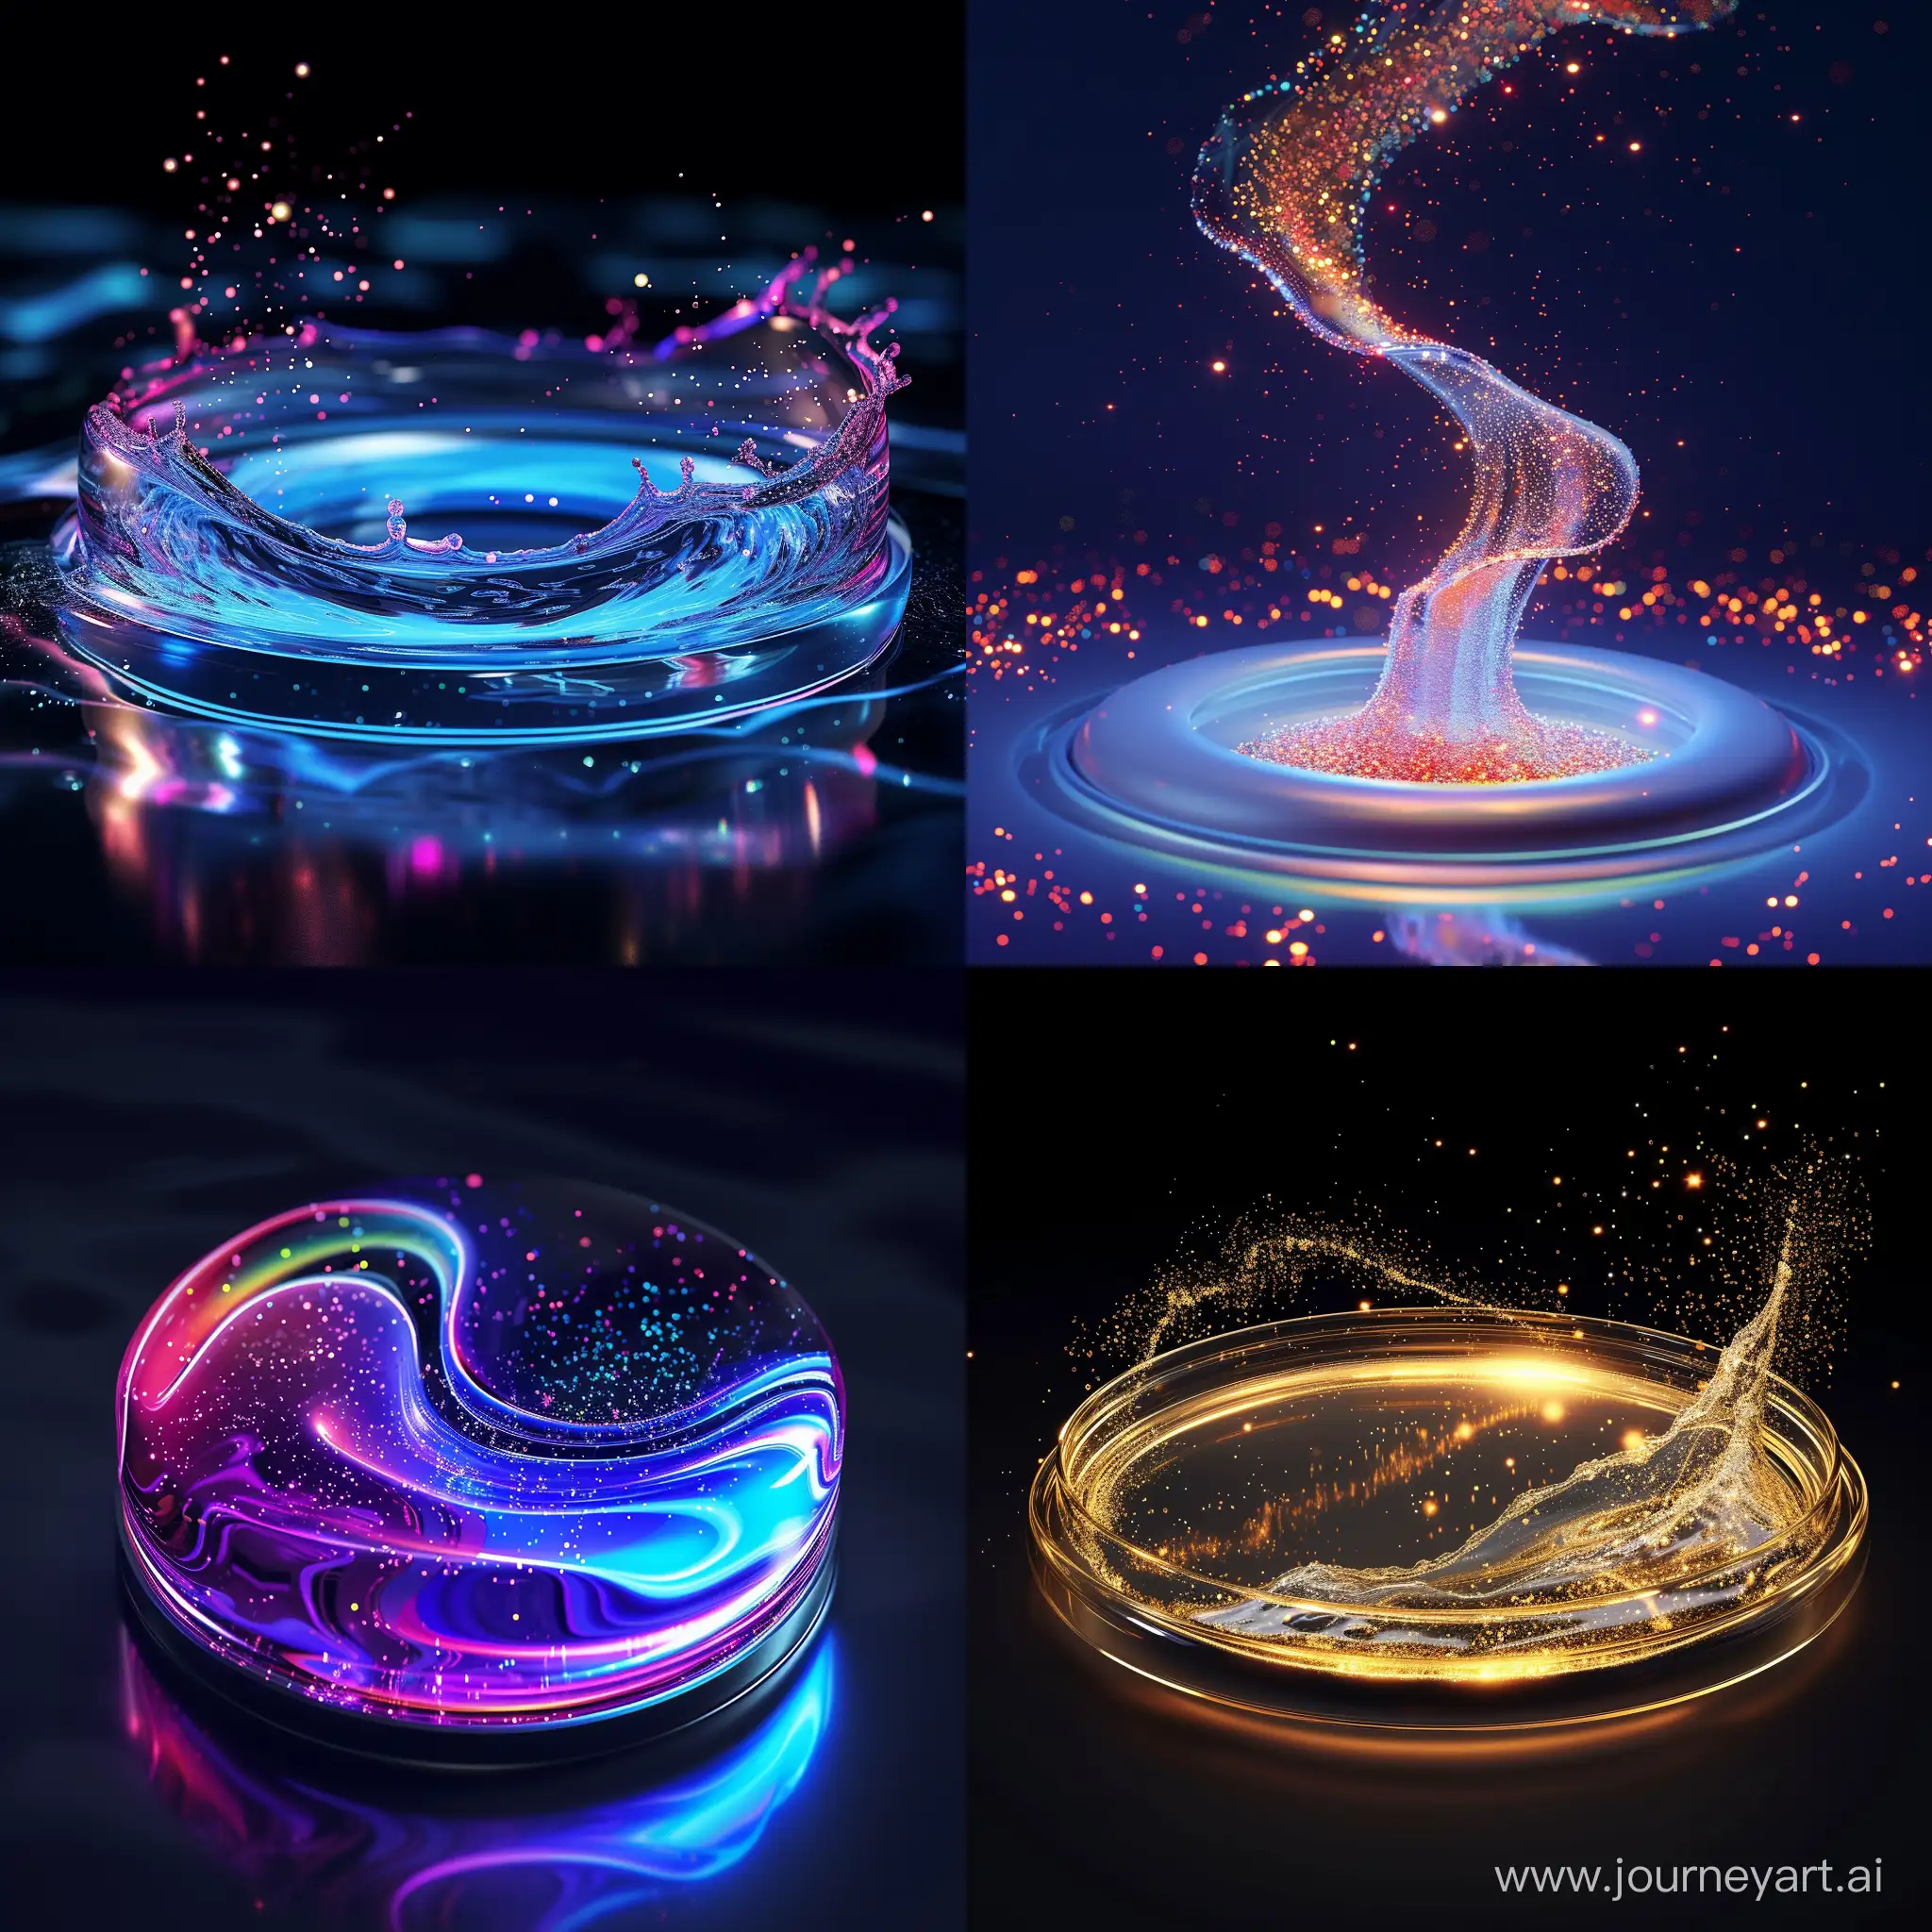 Fashionable-Liquid-Lid-Design-with-Dynamic-Liquid-Flow-and-Luminous-Particles